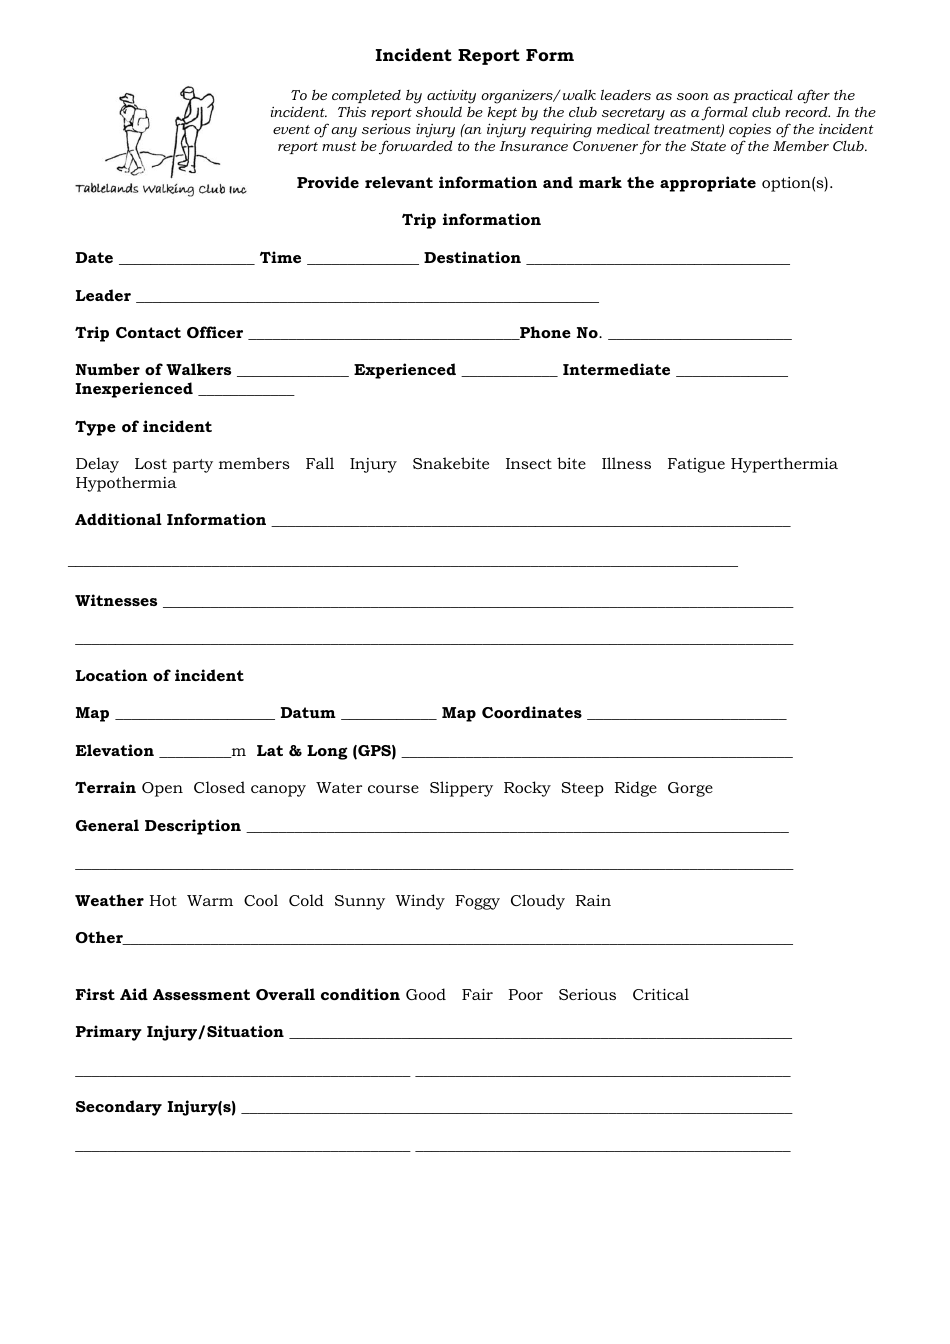 Incident Report Form - Tablelands Walking Club Inc, Page 1